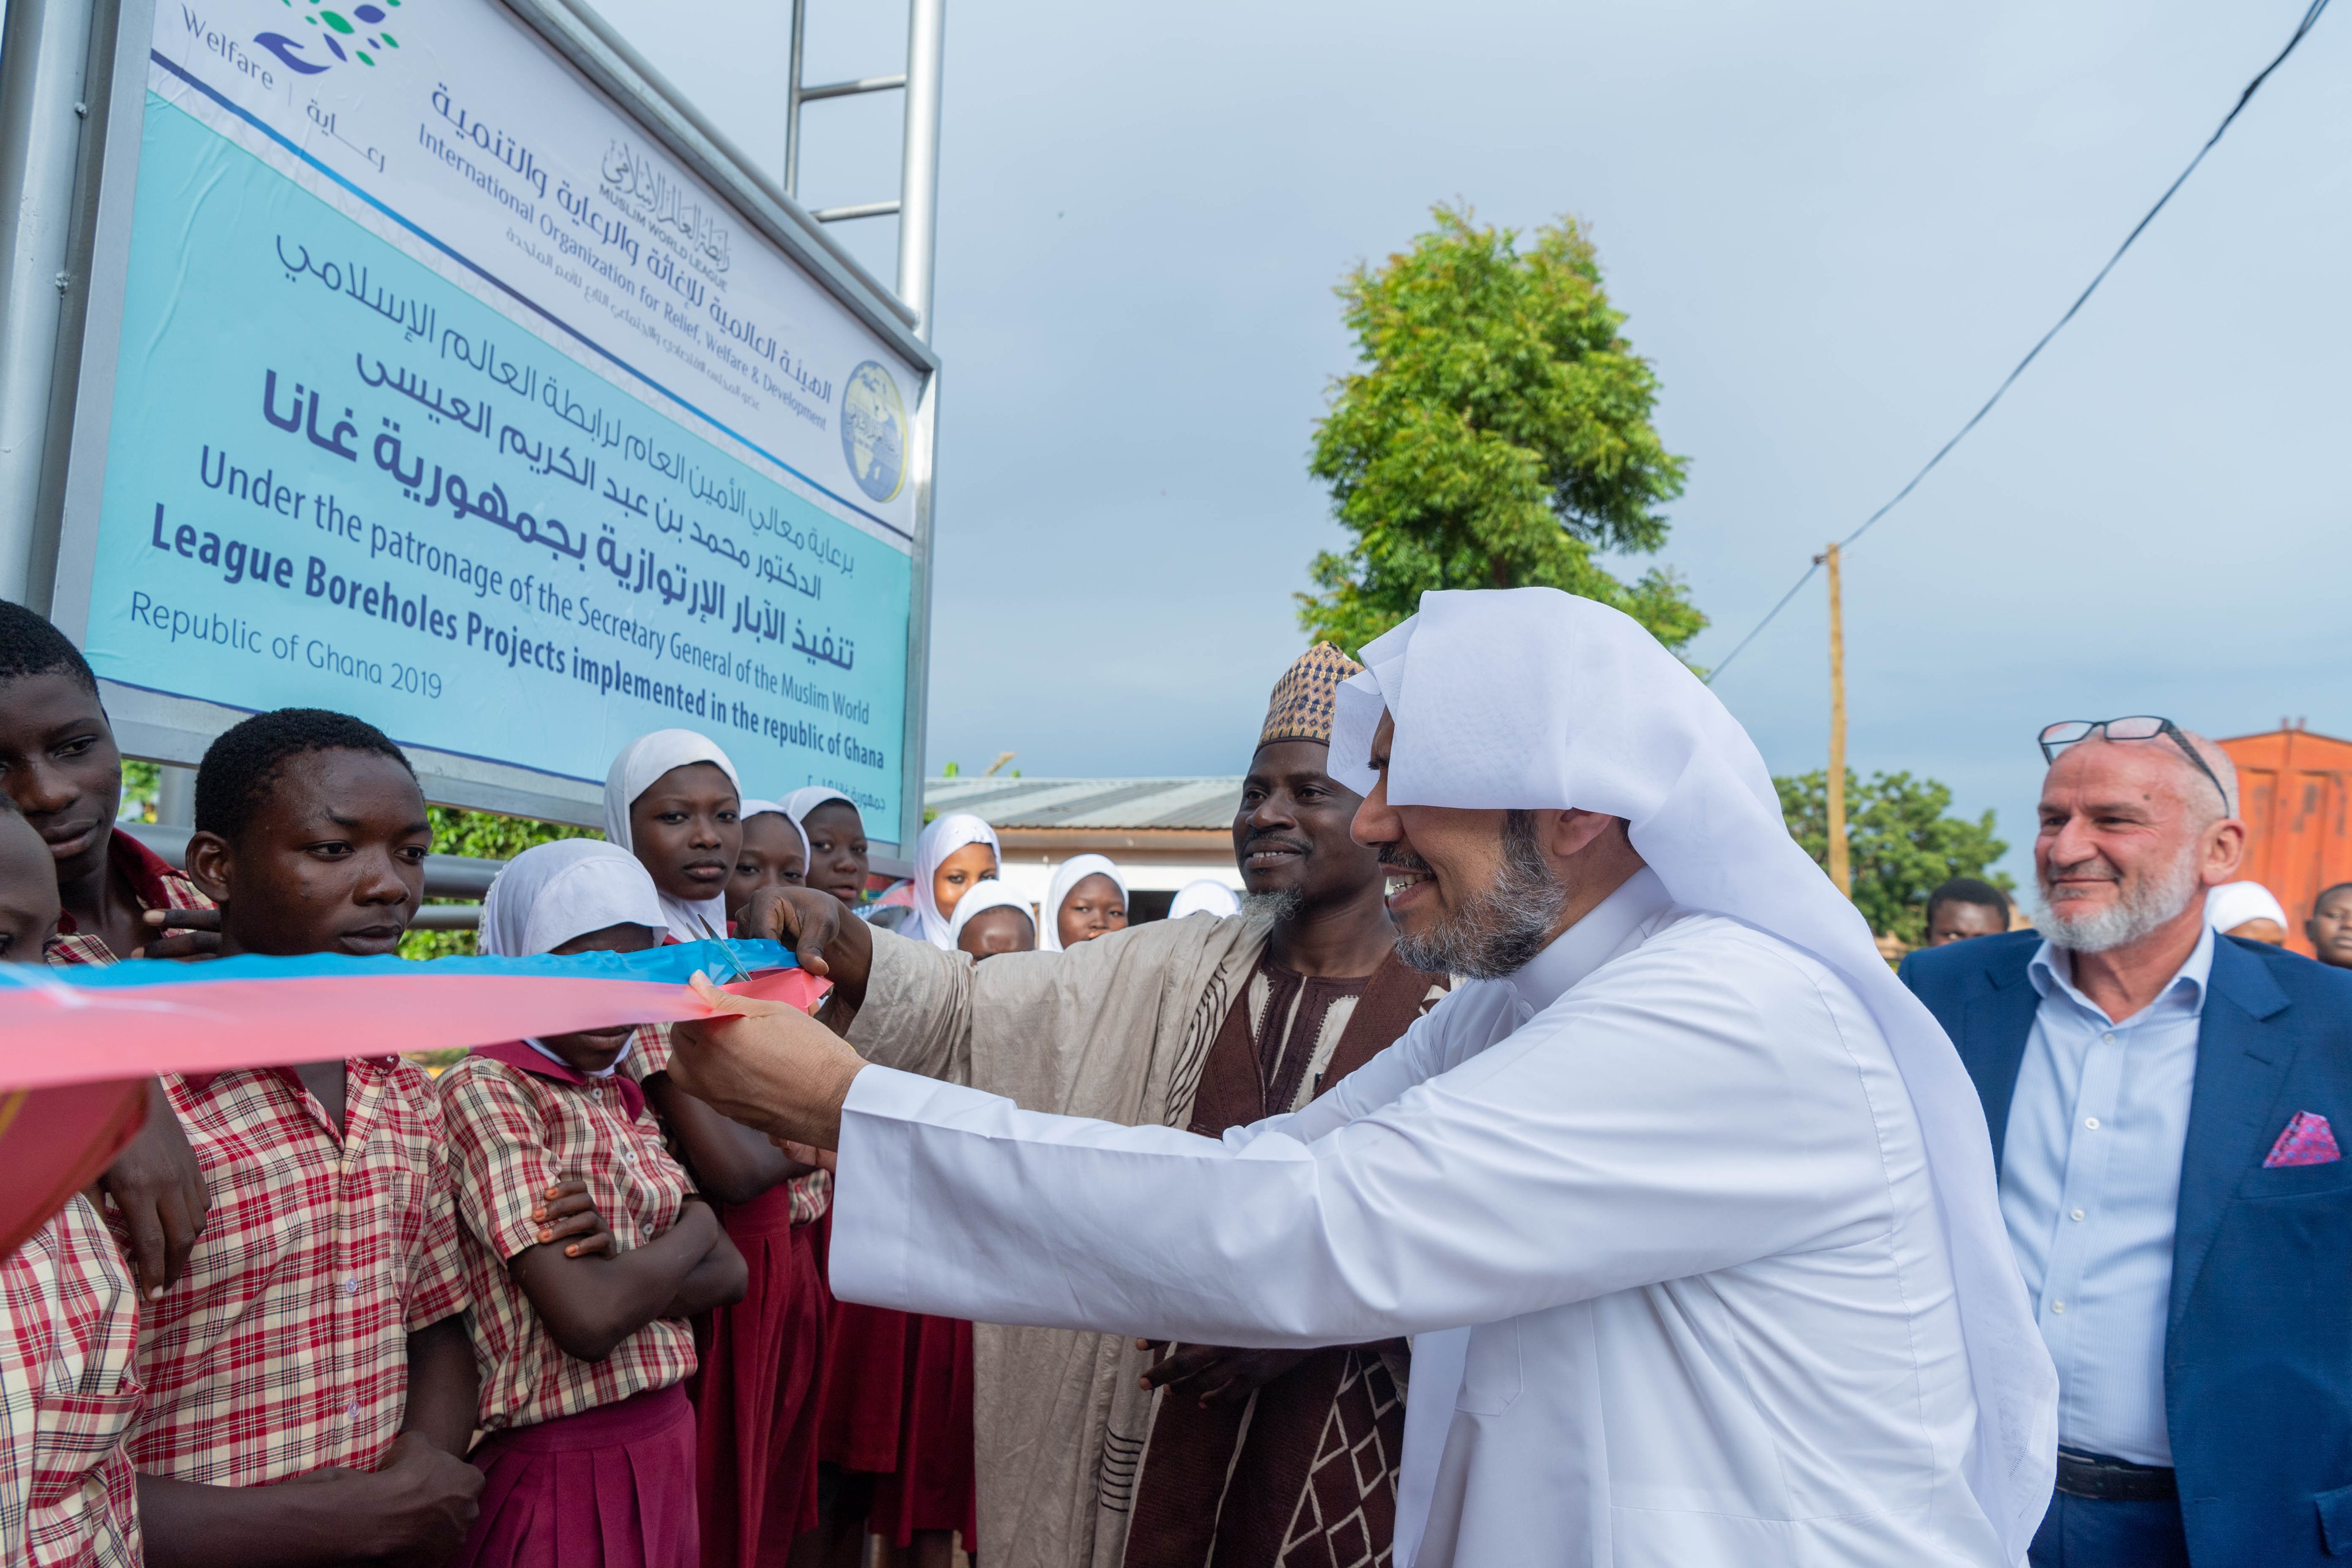 In Ghana, MWL constructed wells to provide fresh drinking water